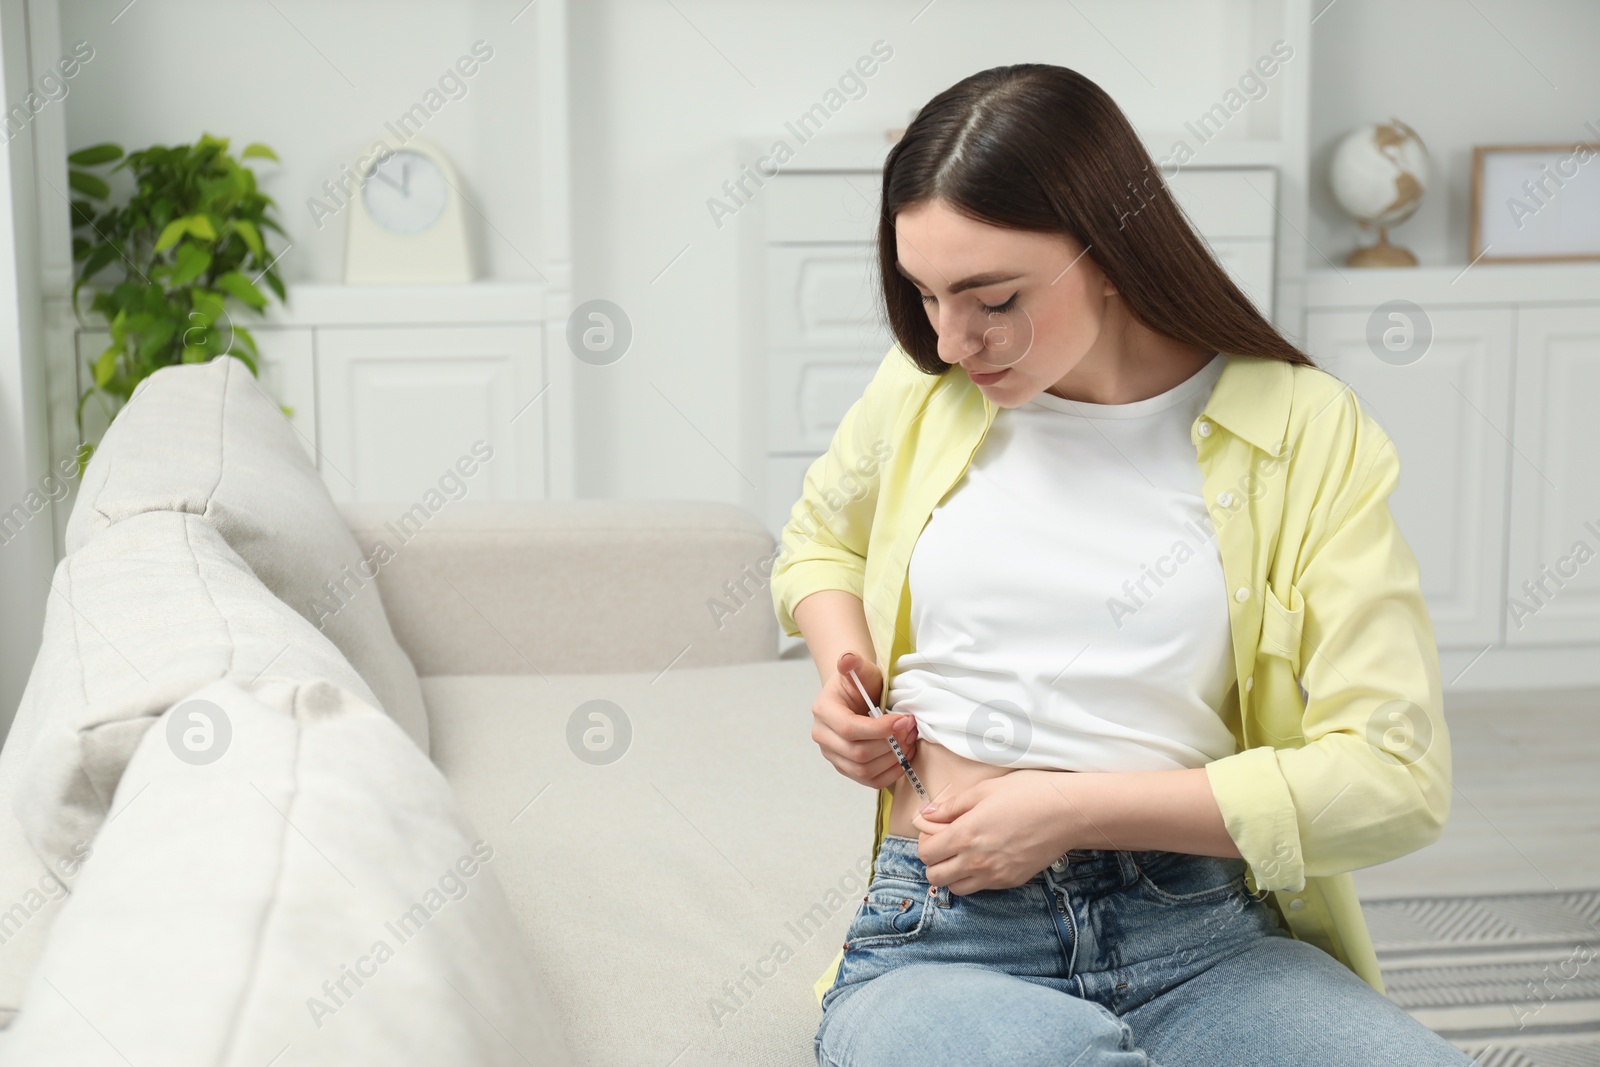 Photo of Diabetes. Woman making insulin injection into her belly on sofa at home, space for text